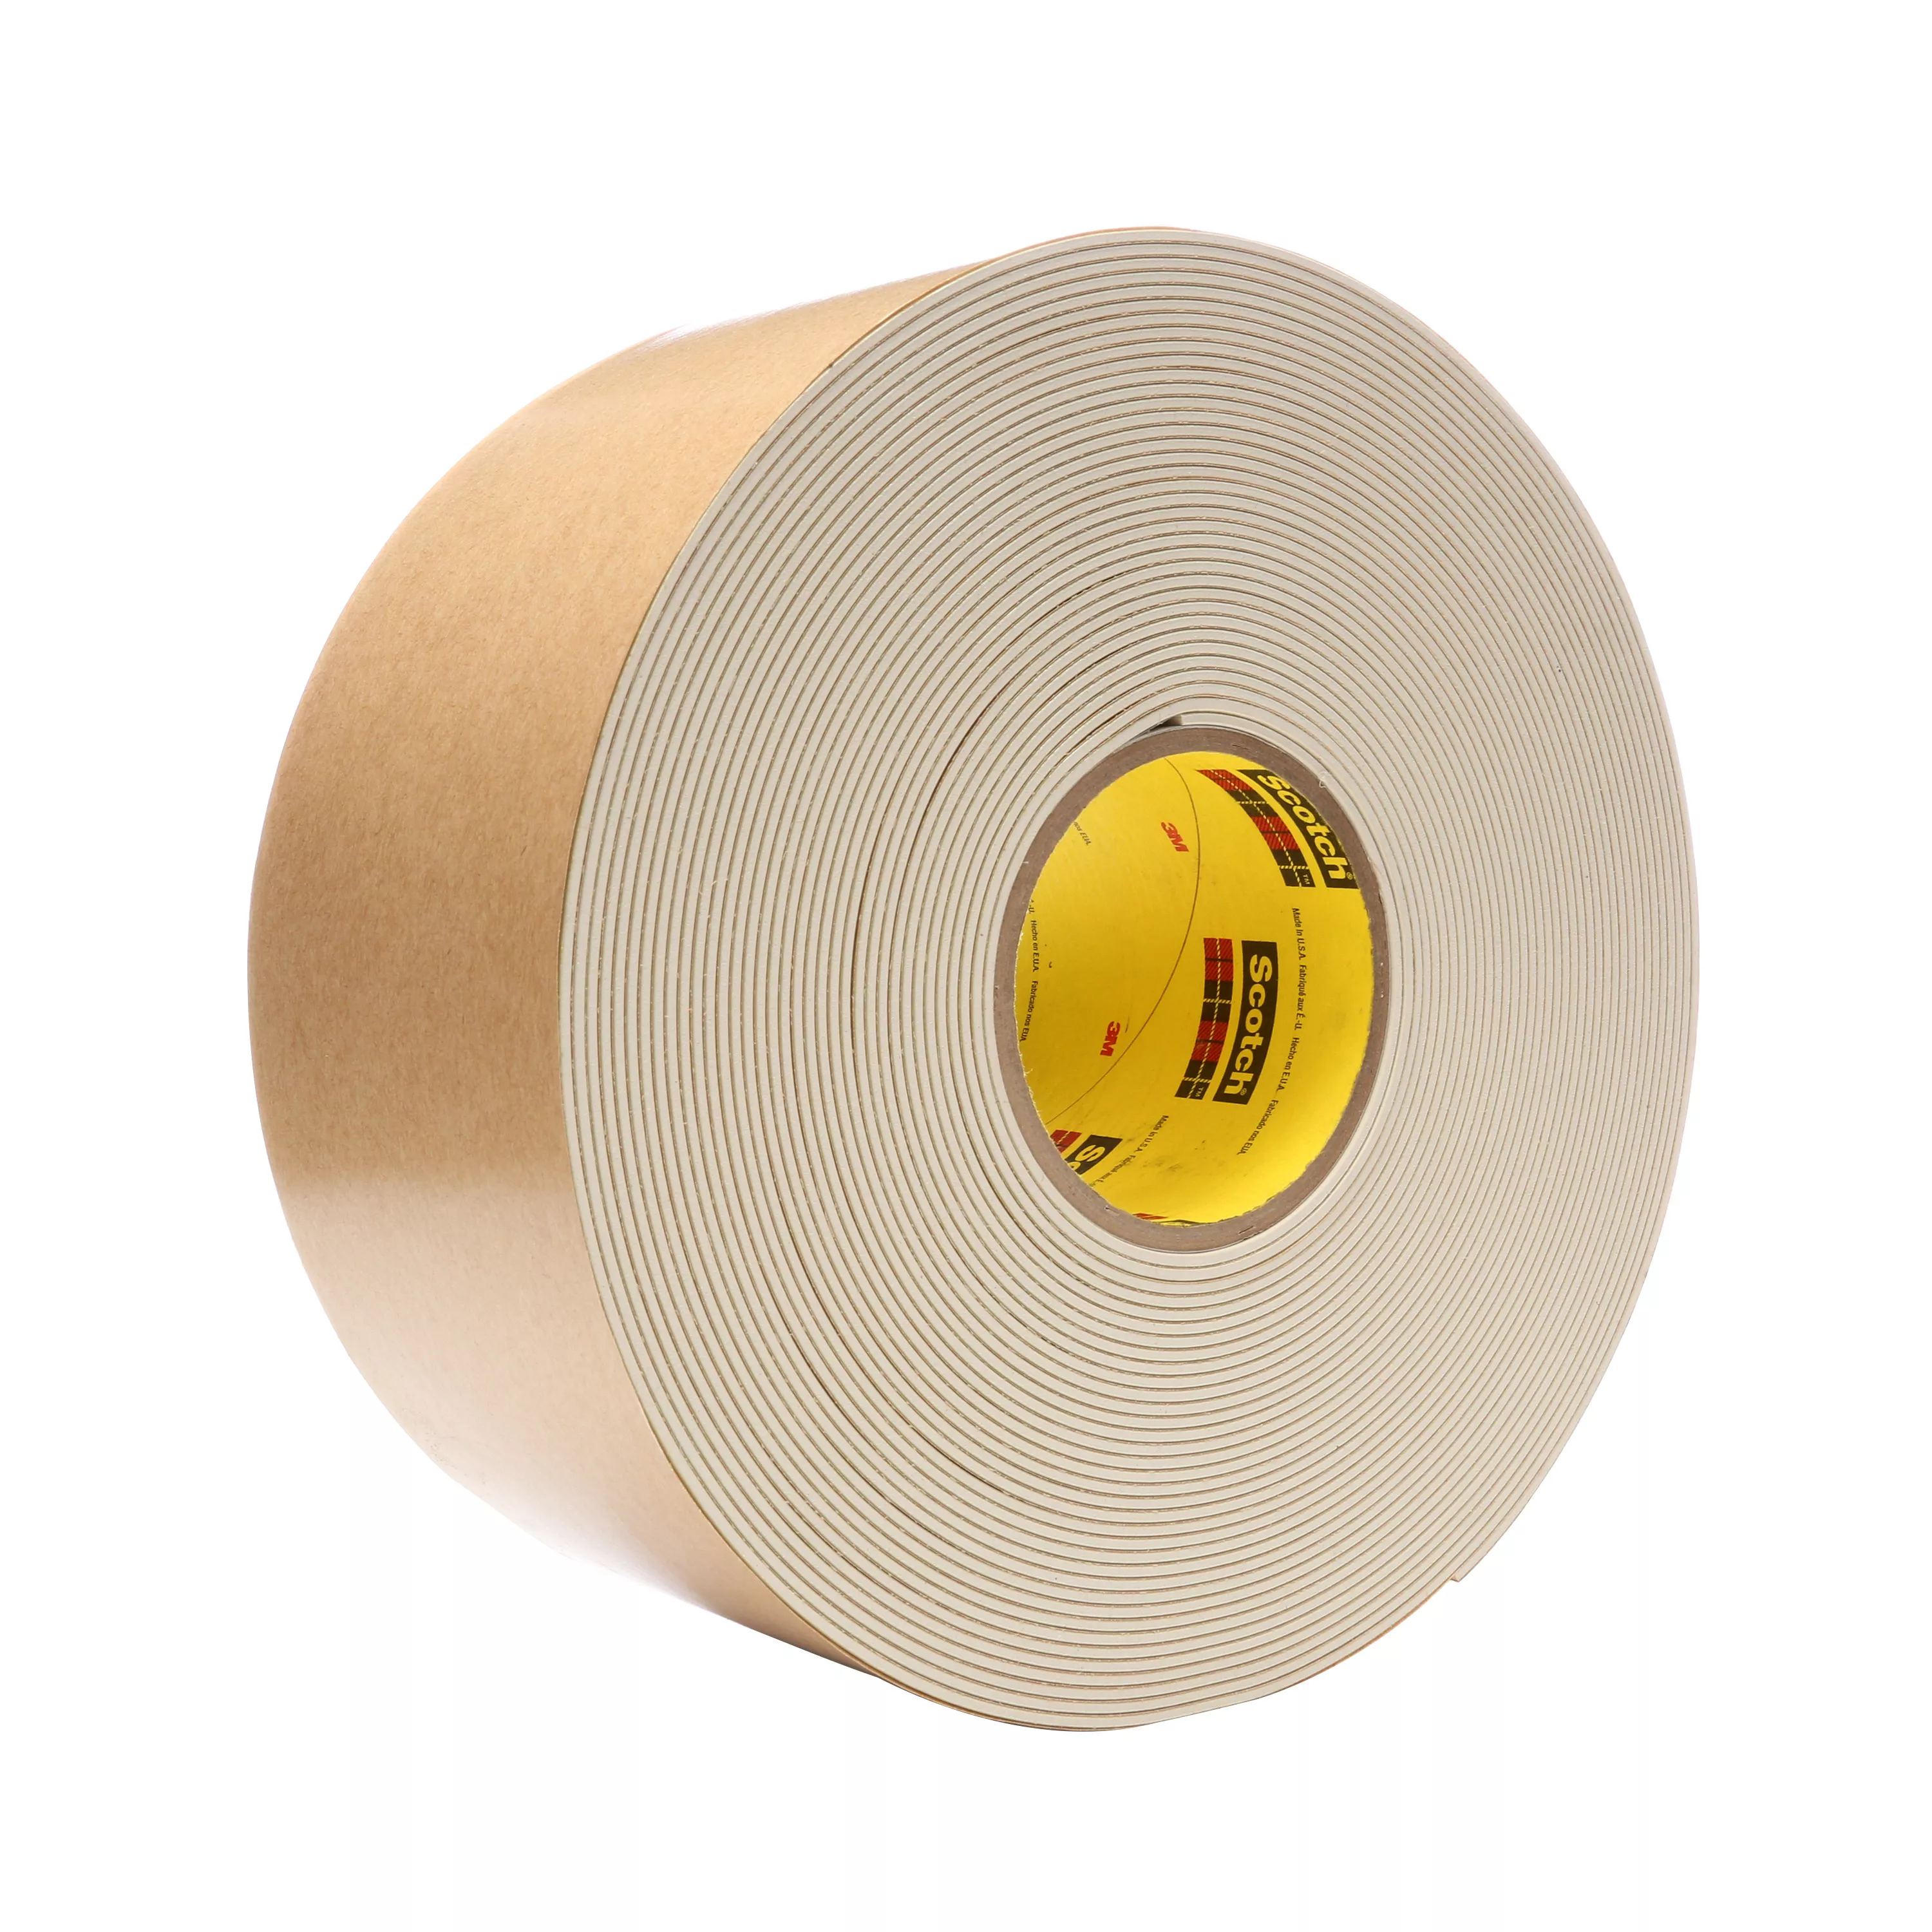 3M™ Impact Stripping Tape 528, Tan, 4 in x 20 yd, 82 mil, 2 Roll/Case